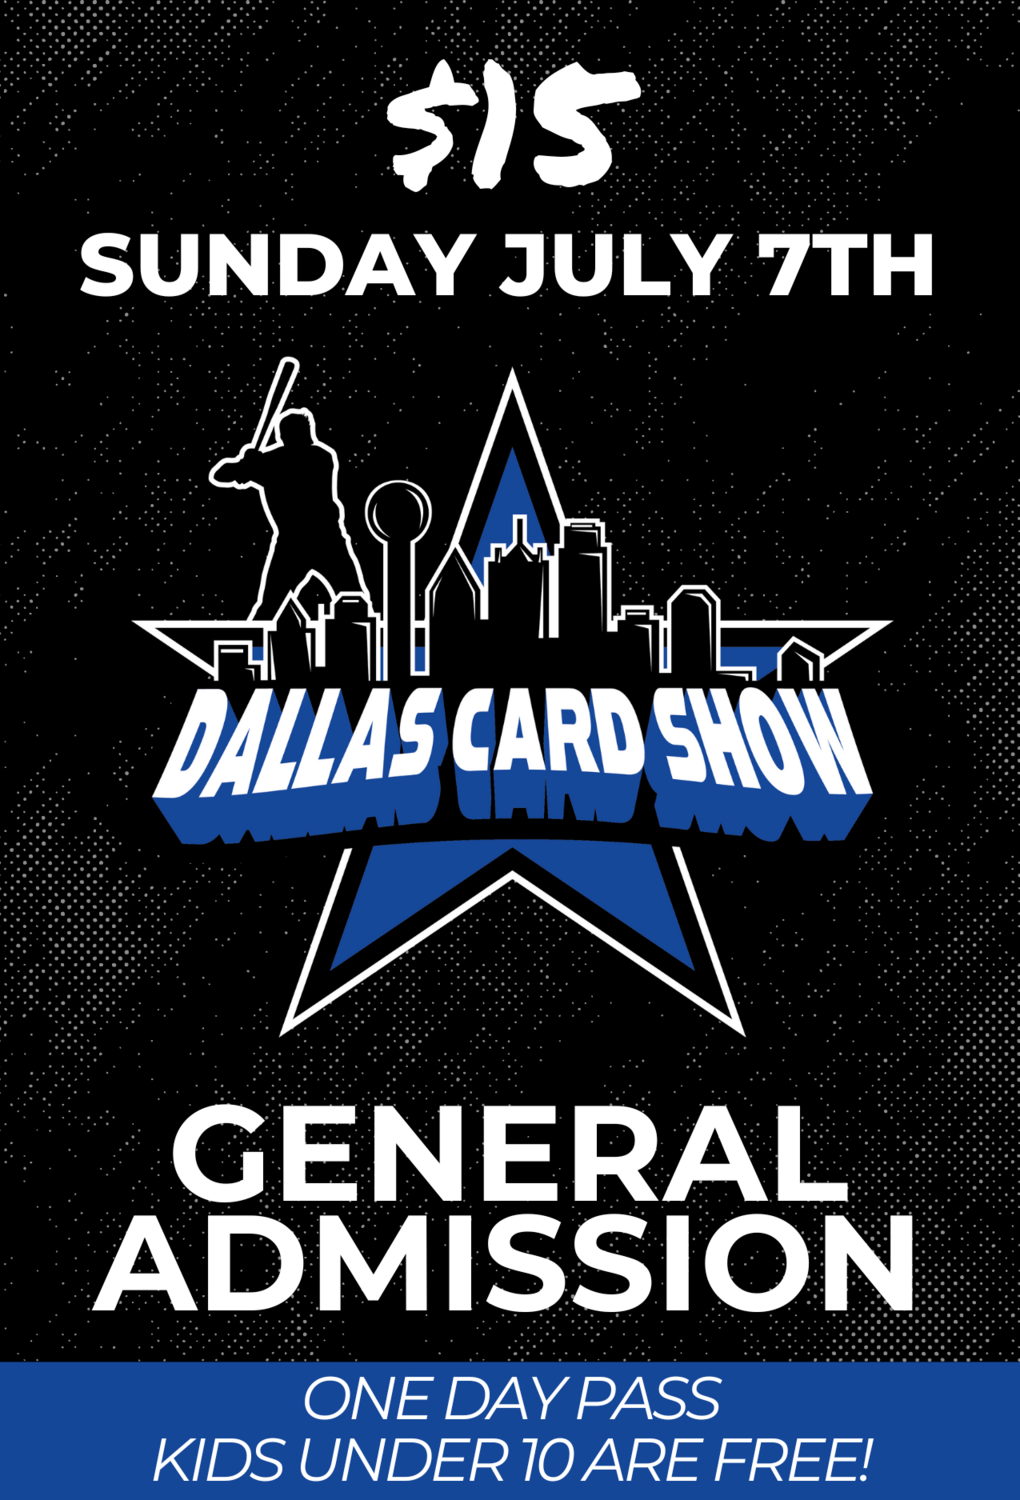 Sunday July 7th - General Admission